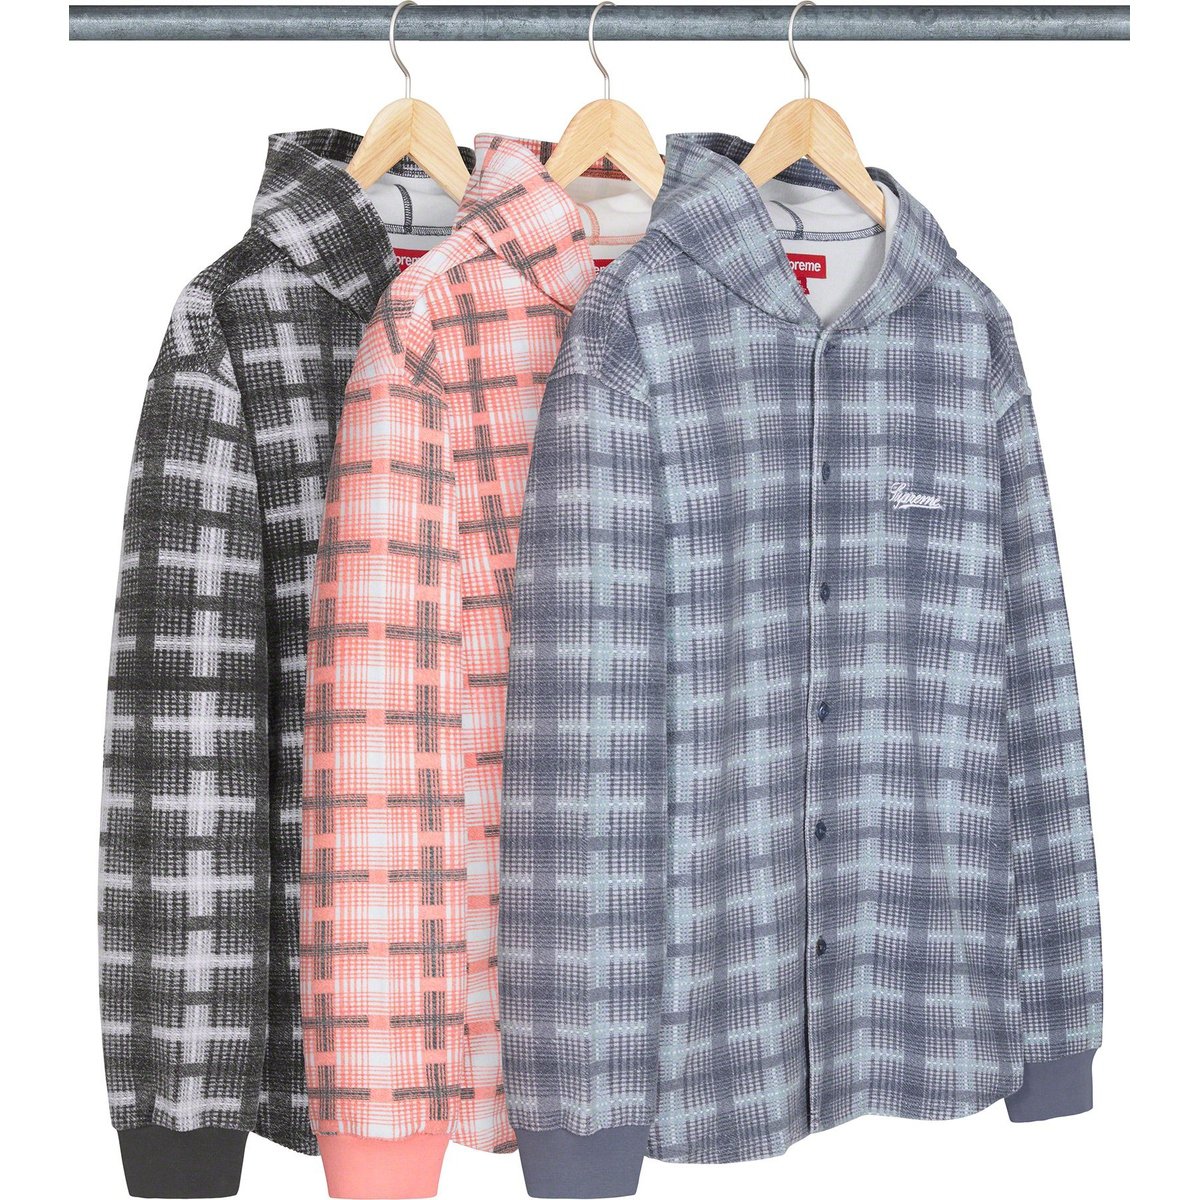 Supreme Hooded Plaid Knit Shirt released during fall winter 23 season